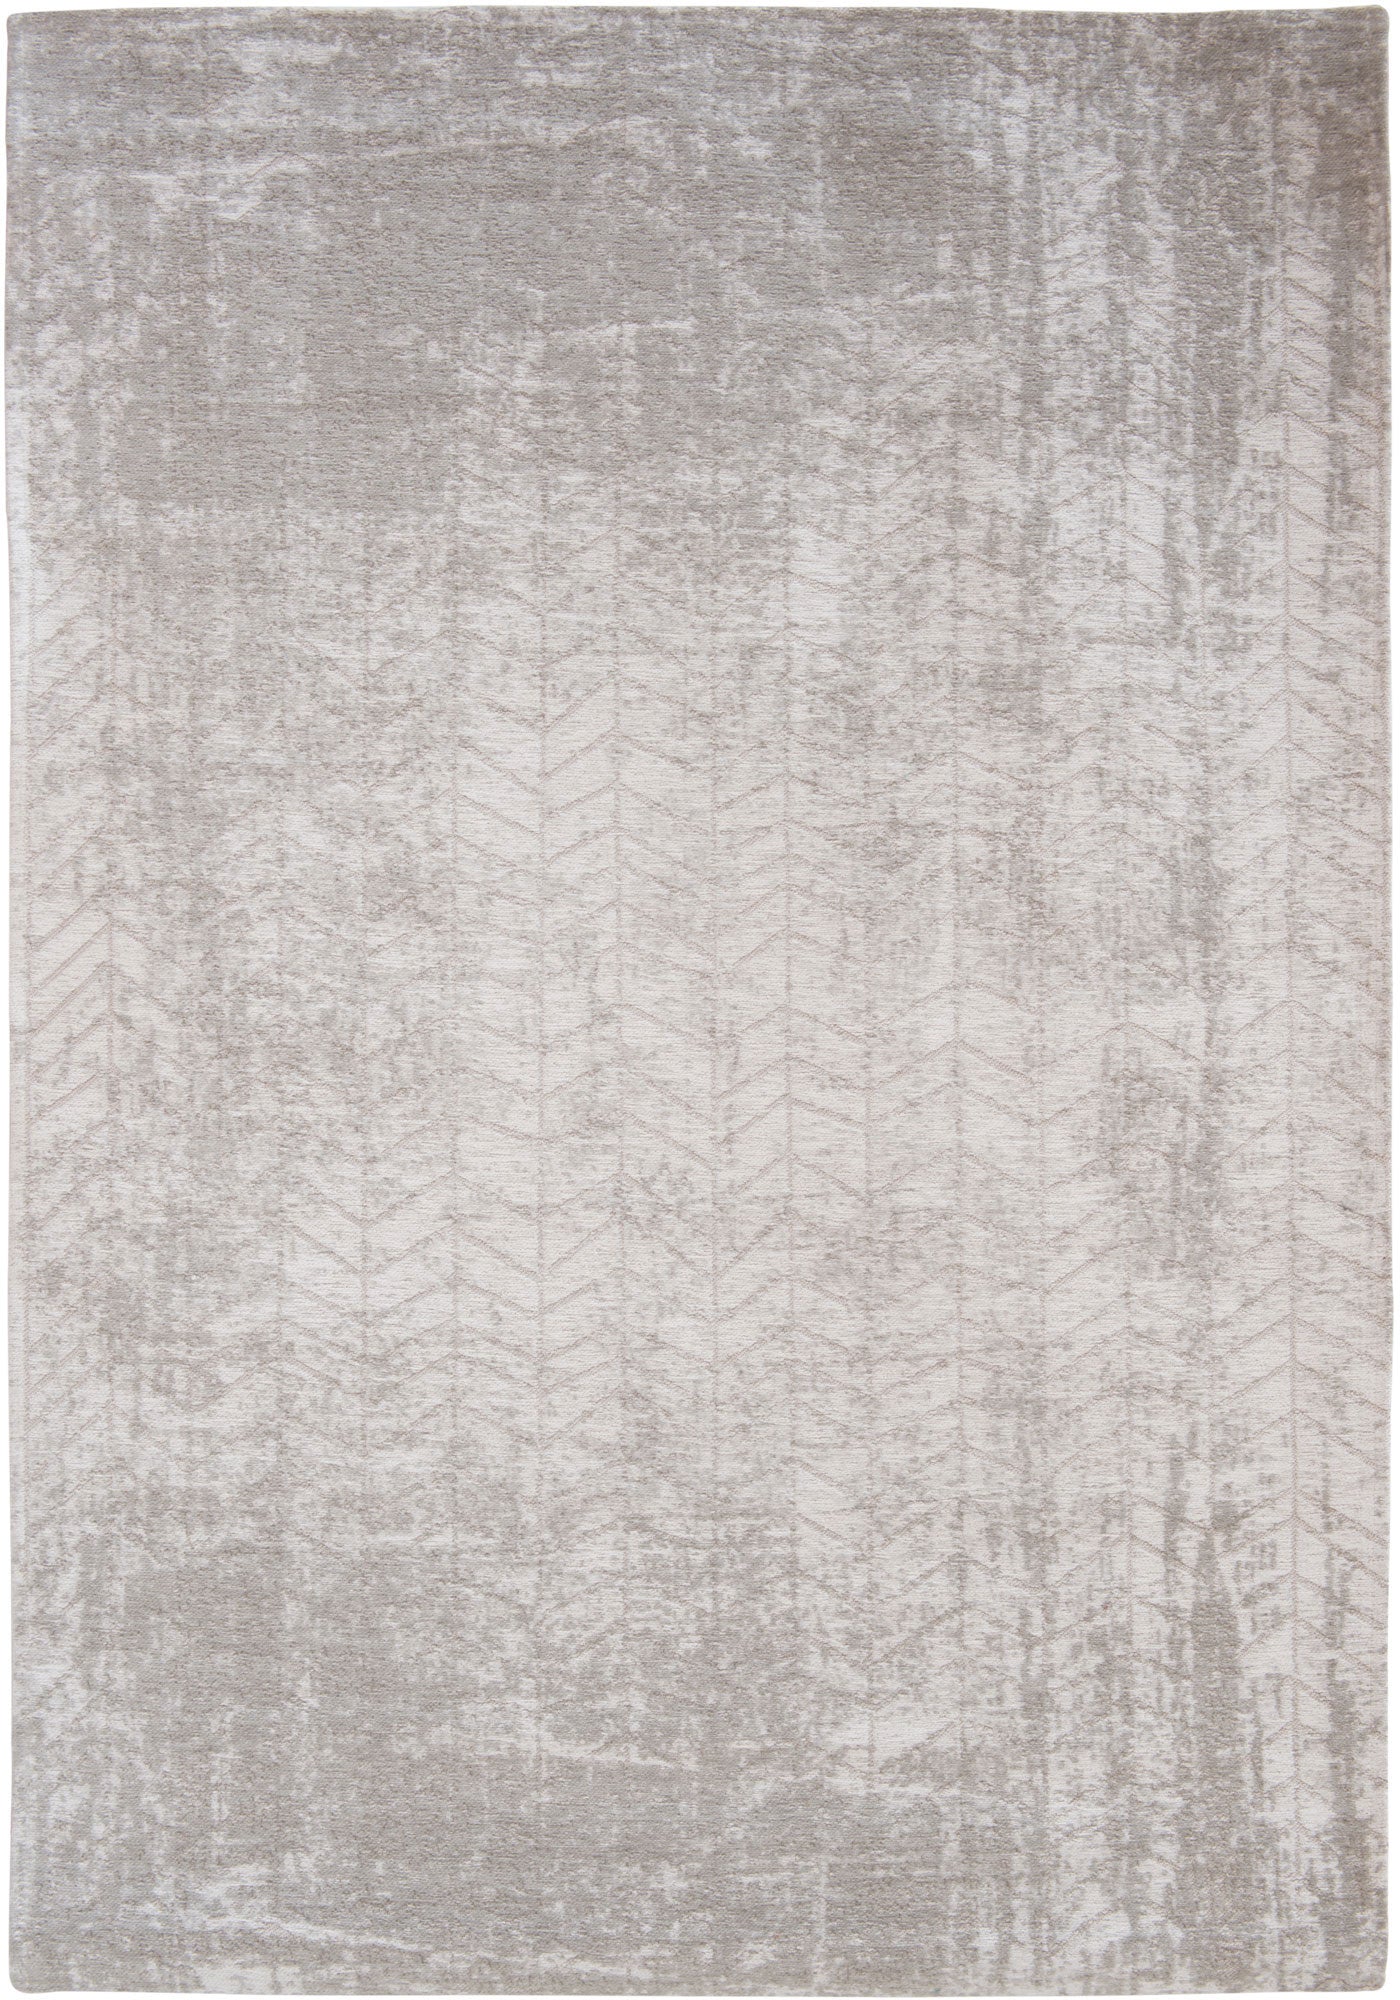 Ivory flatweave rug with faded grey chevron pattern